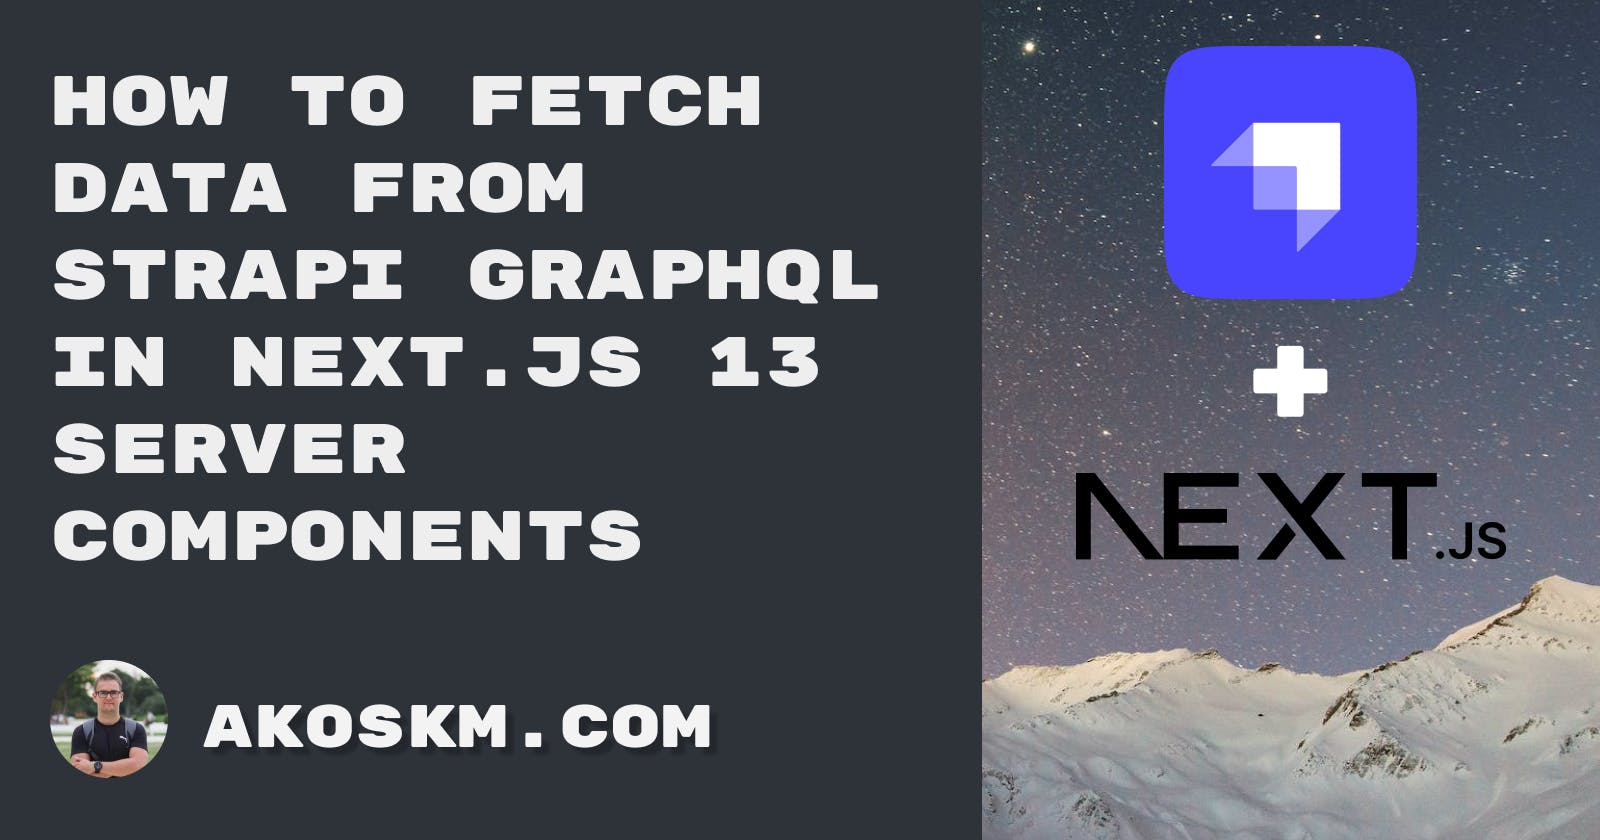 How to Fetch Data from Strapi GraphQL in Next.js 13 Server Components